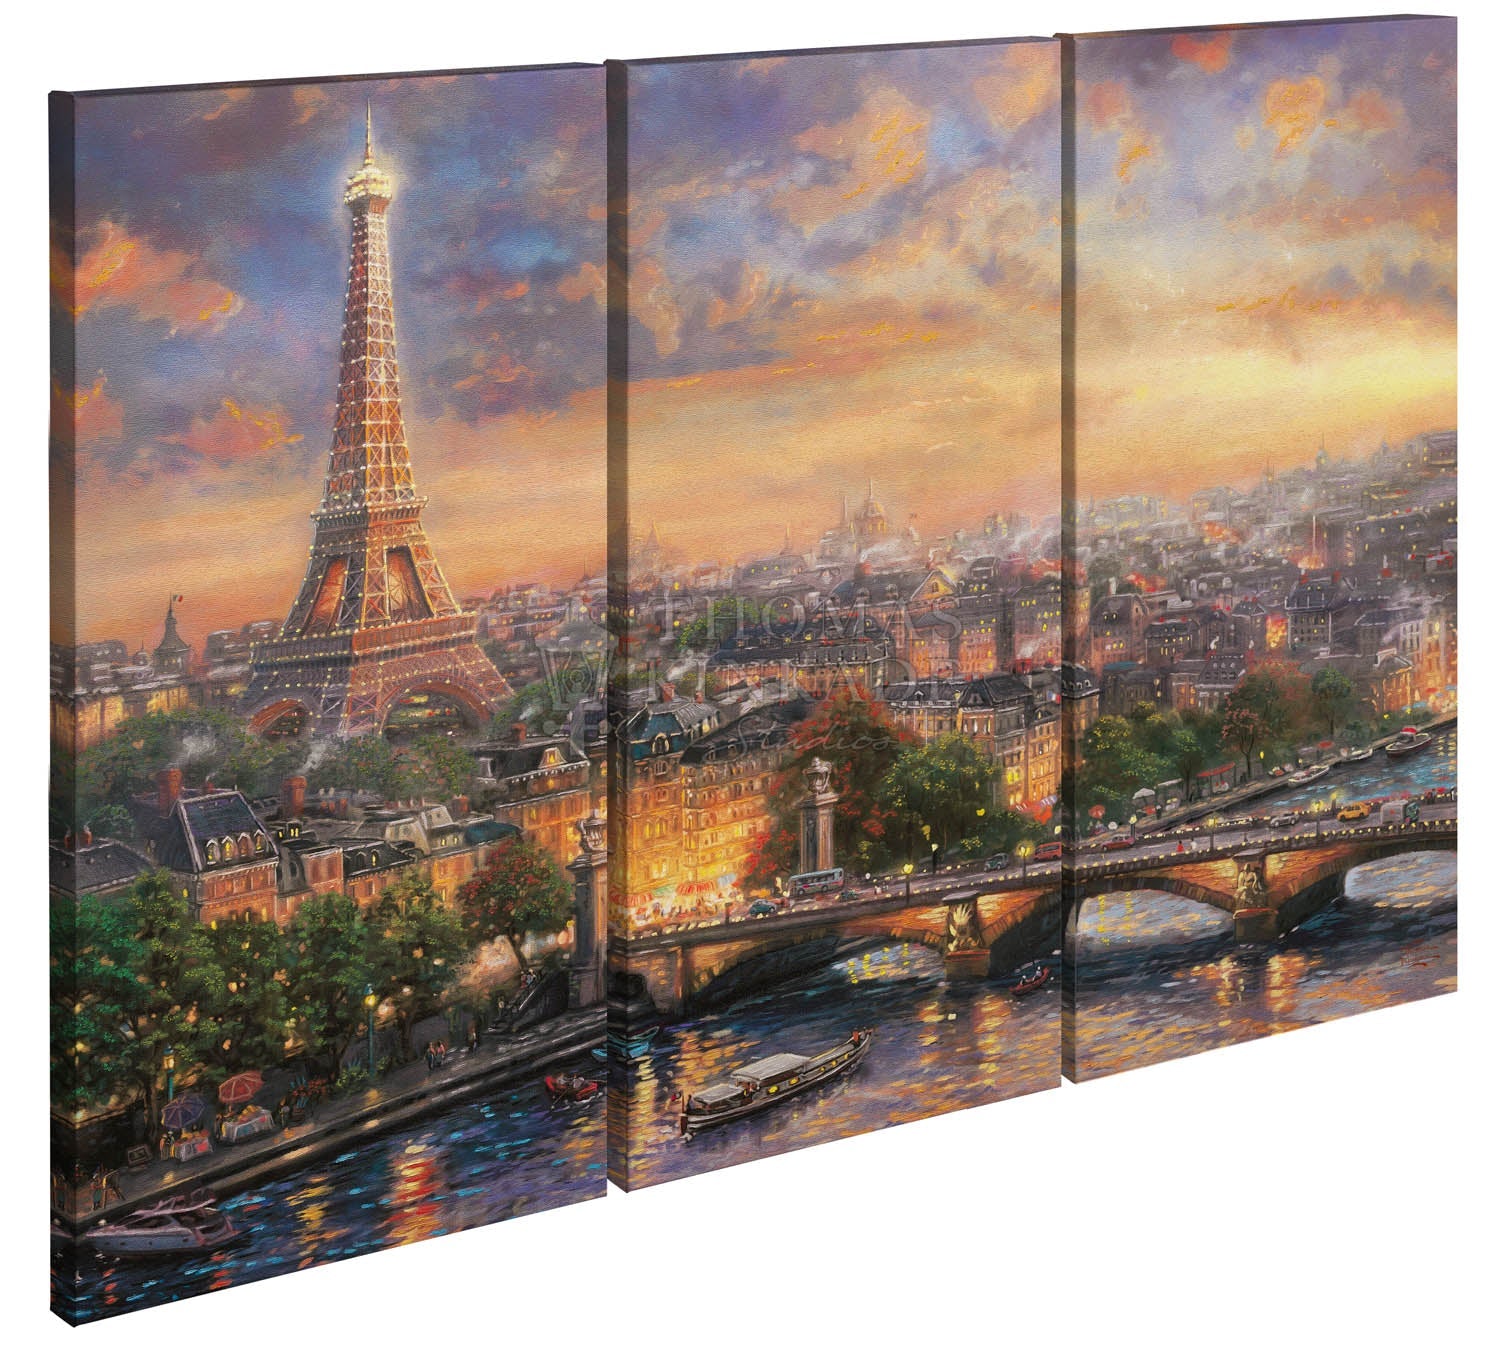 Painting Canvas Panel, Multi Pack - Set of 36